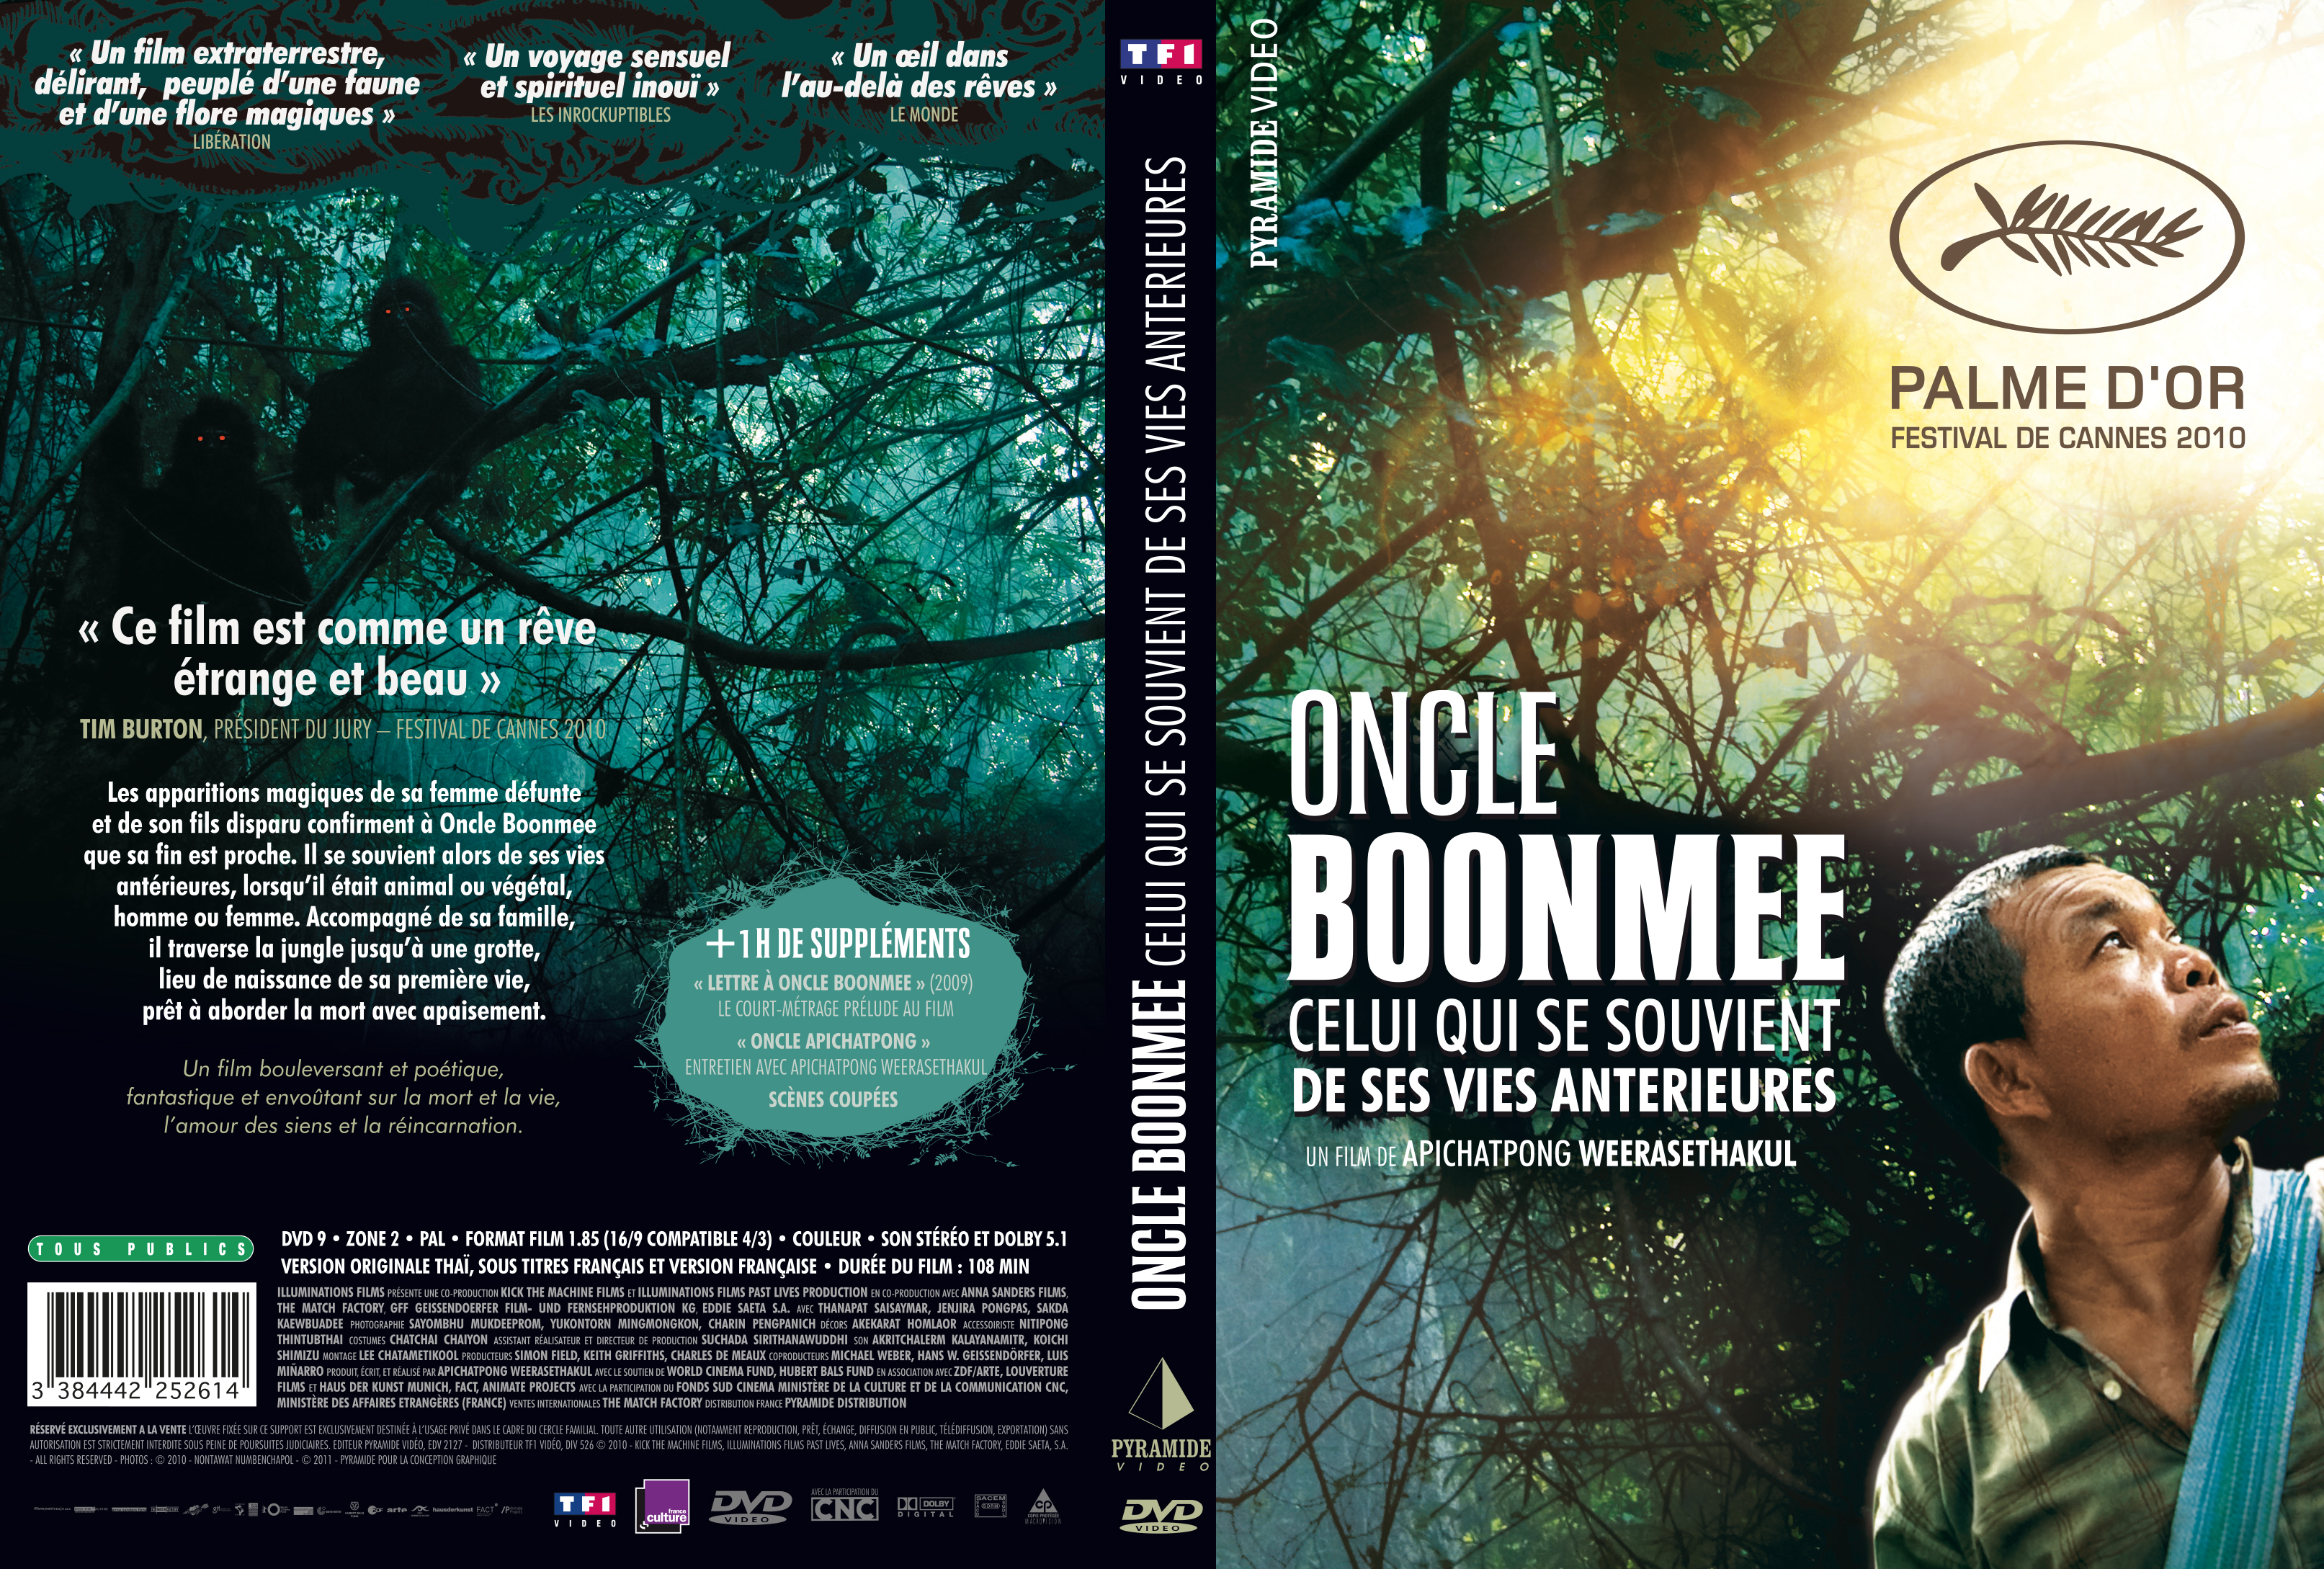 Jaquette DVD Oncle Boonmee v2